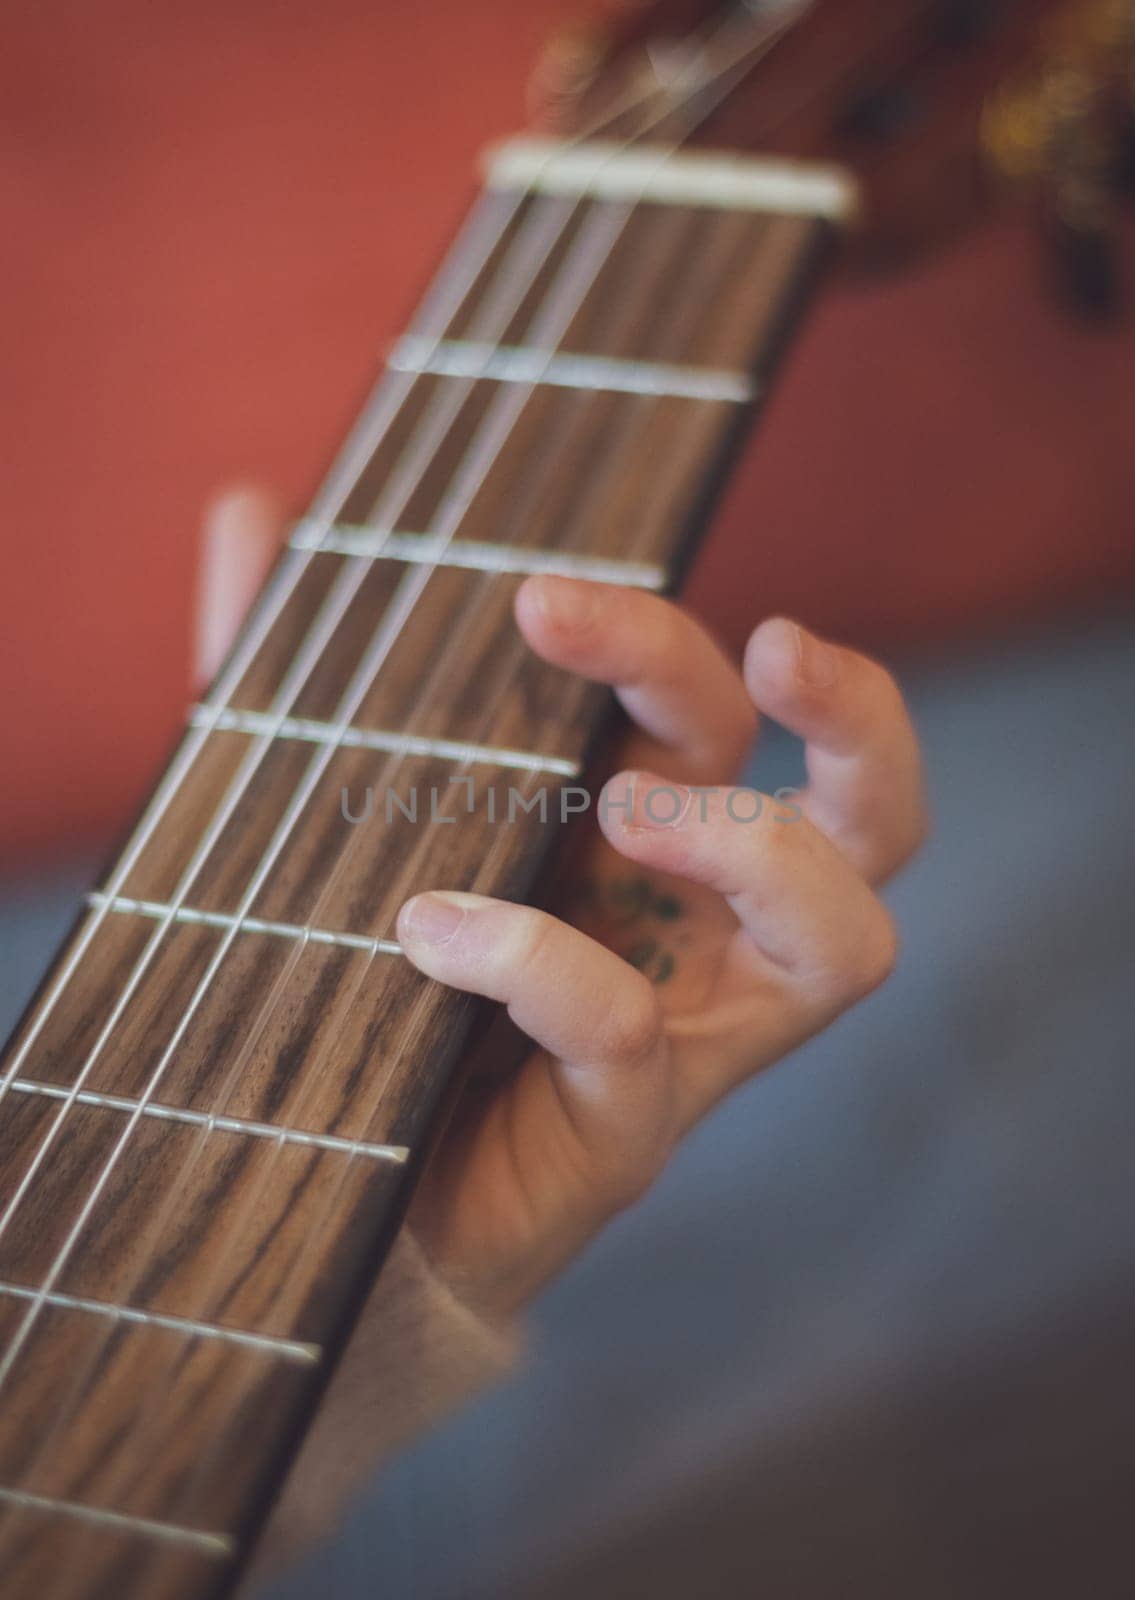 Little caucasian girl holding a guitar and pinching the strings with her fingers, close-up side view. Music education concept.